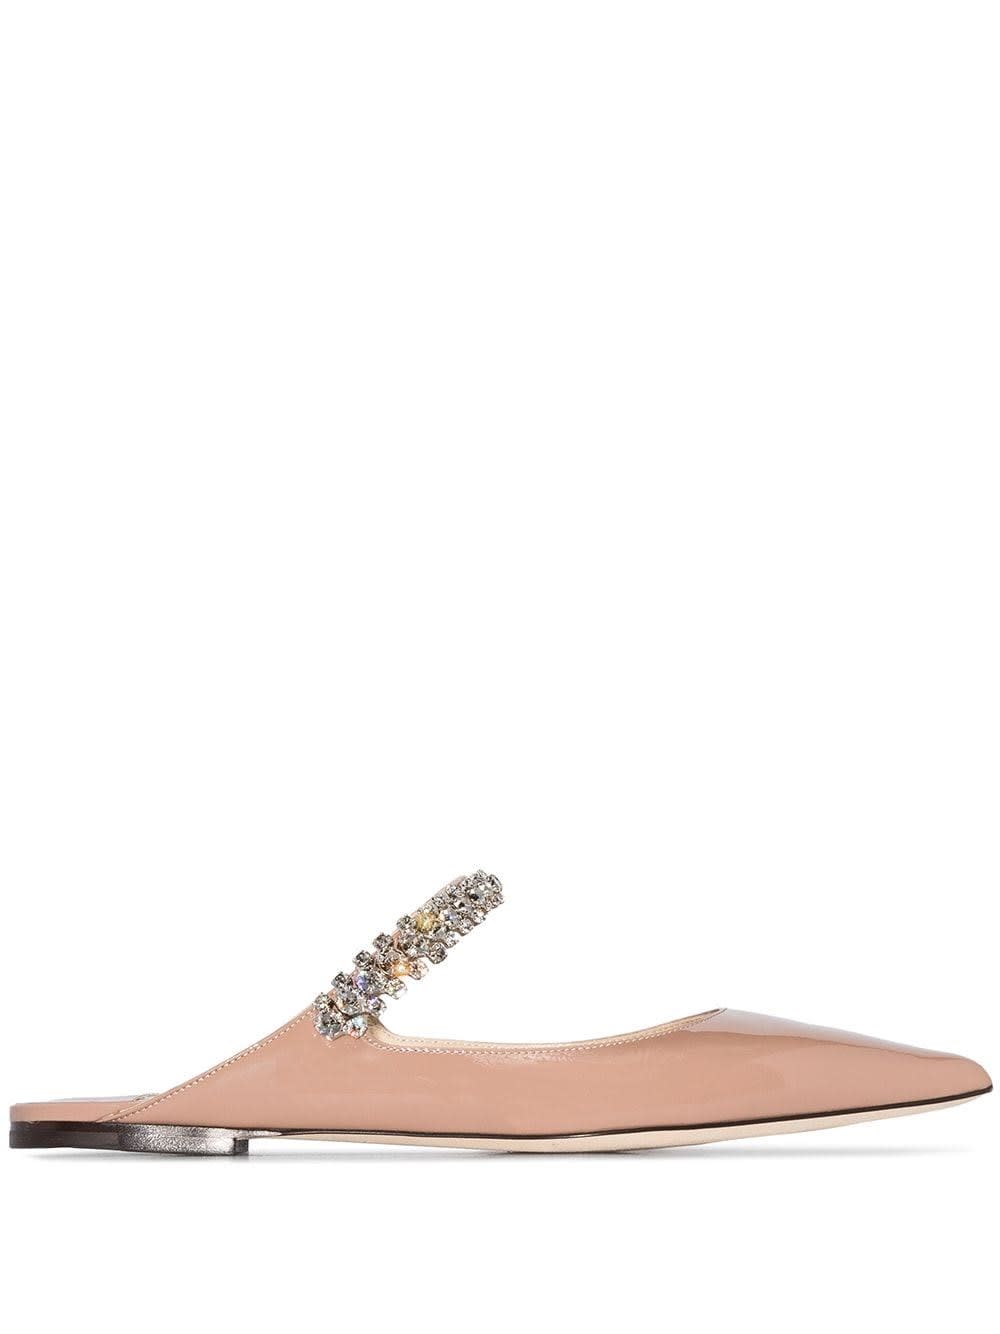 Jimmy Choo Bing Flat Leather Mules With Crystal Insert